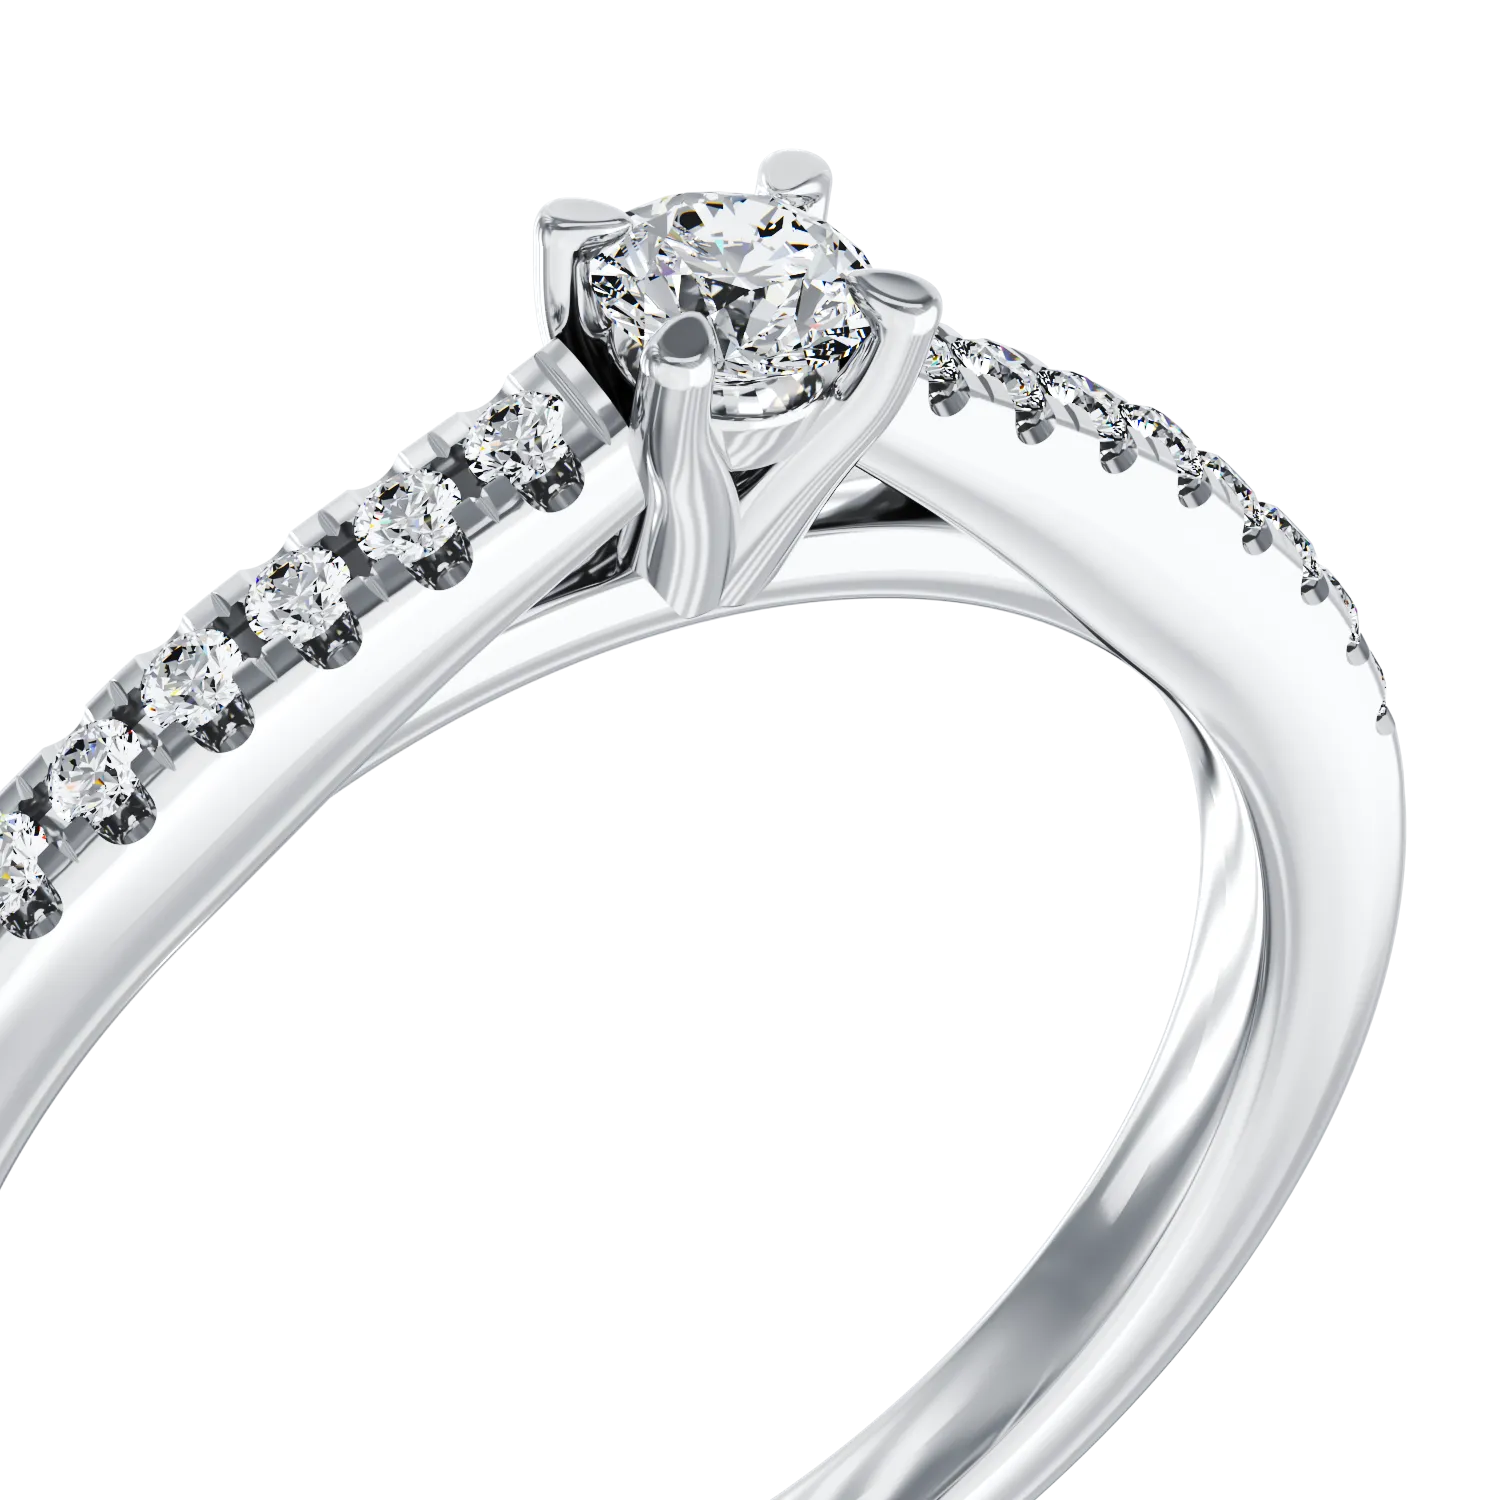 18K white gold engagement ring with 0.08ct diamond and 0.008ct diamonds